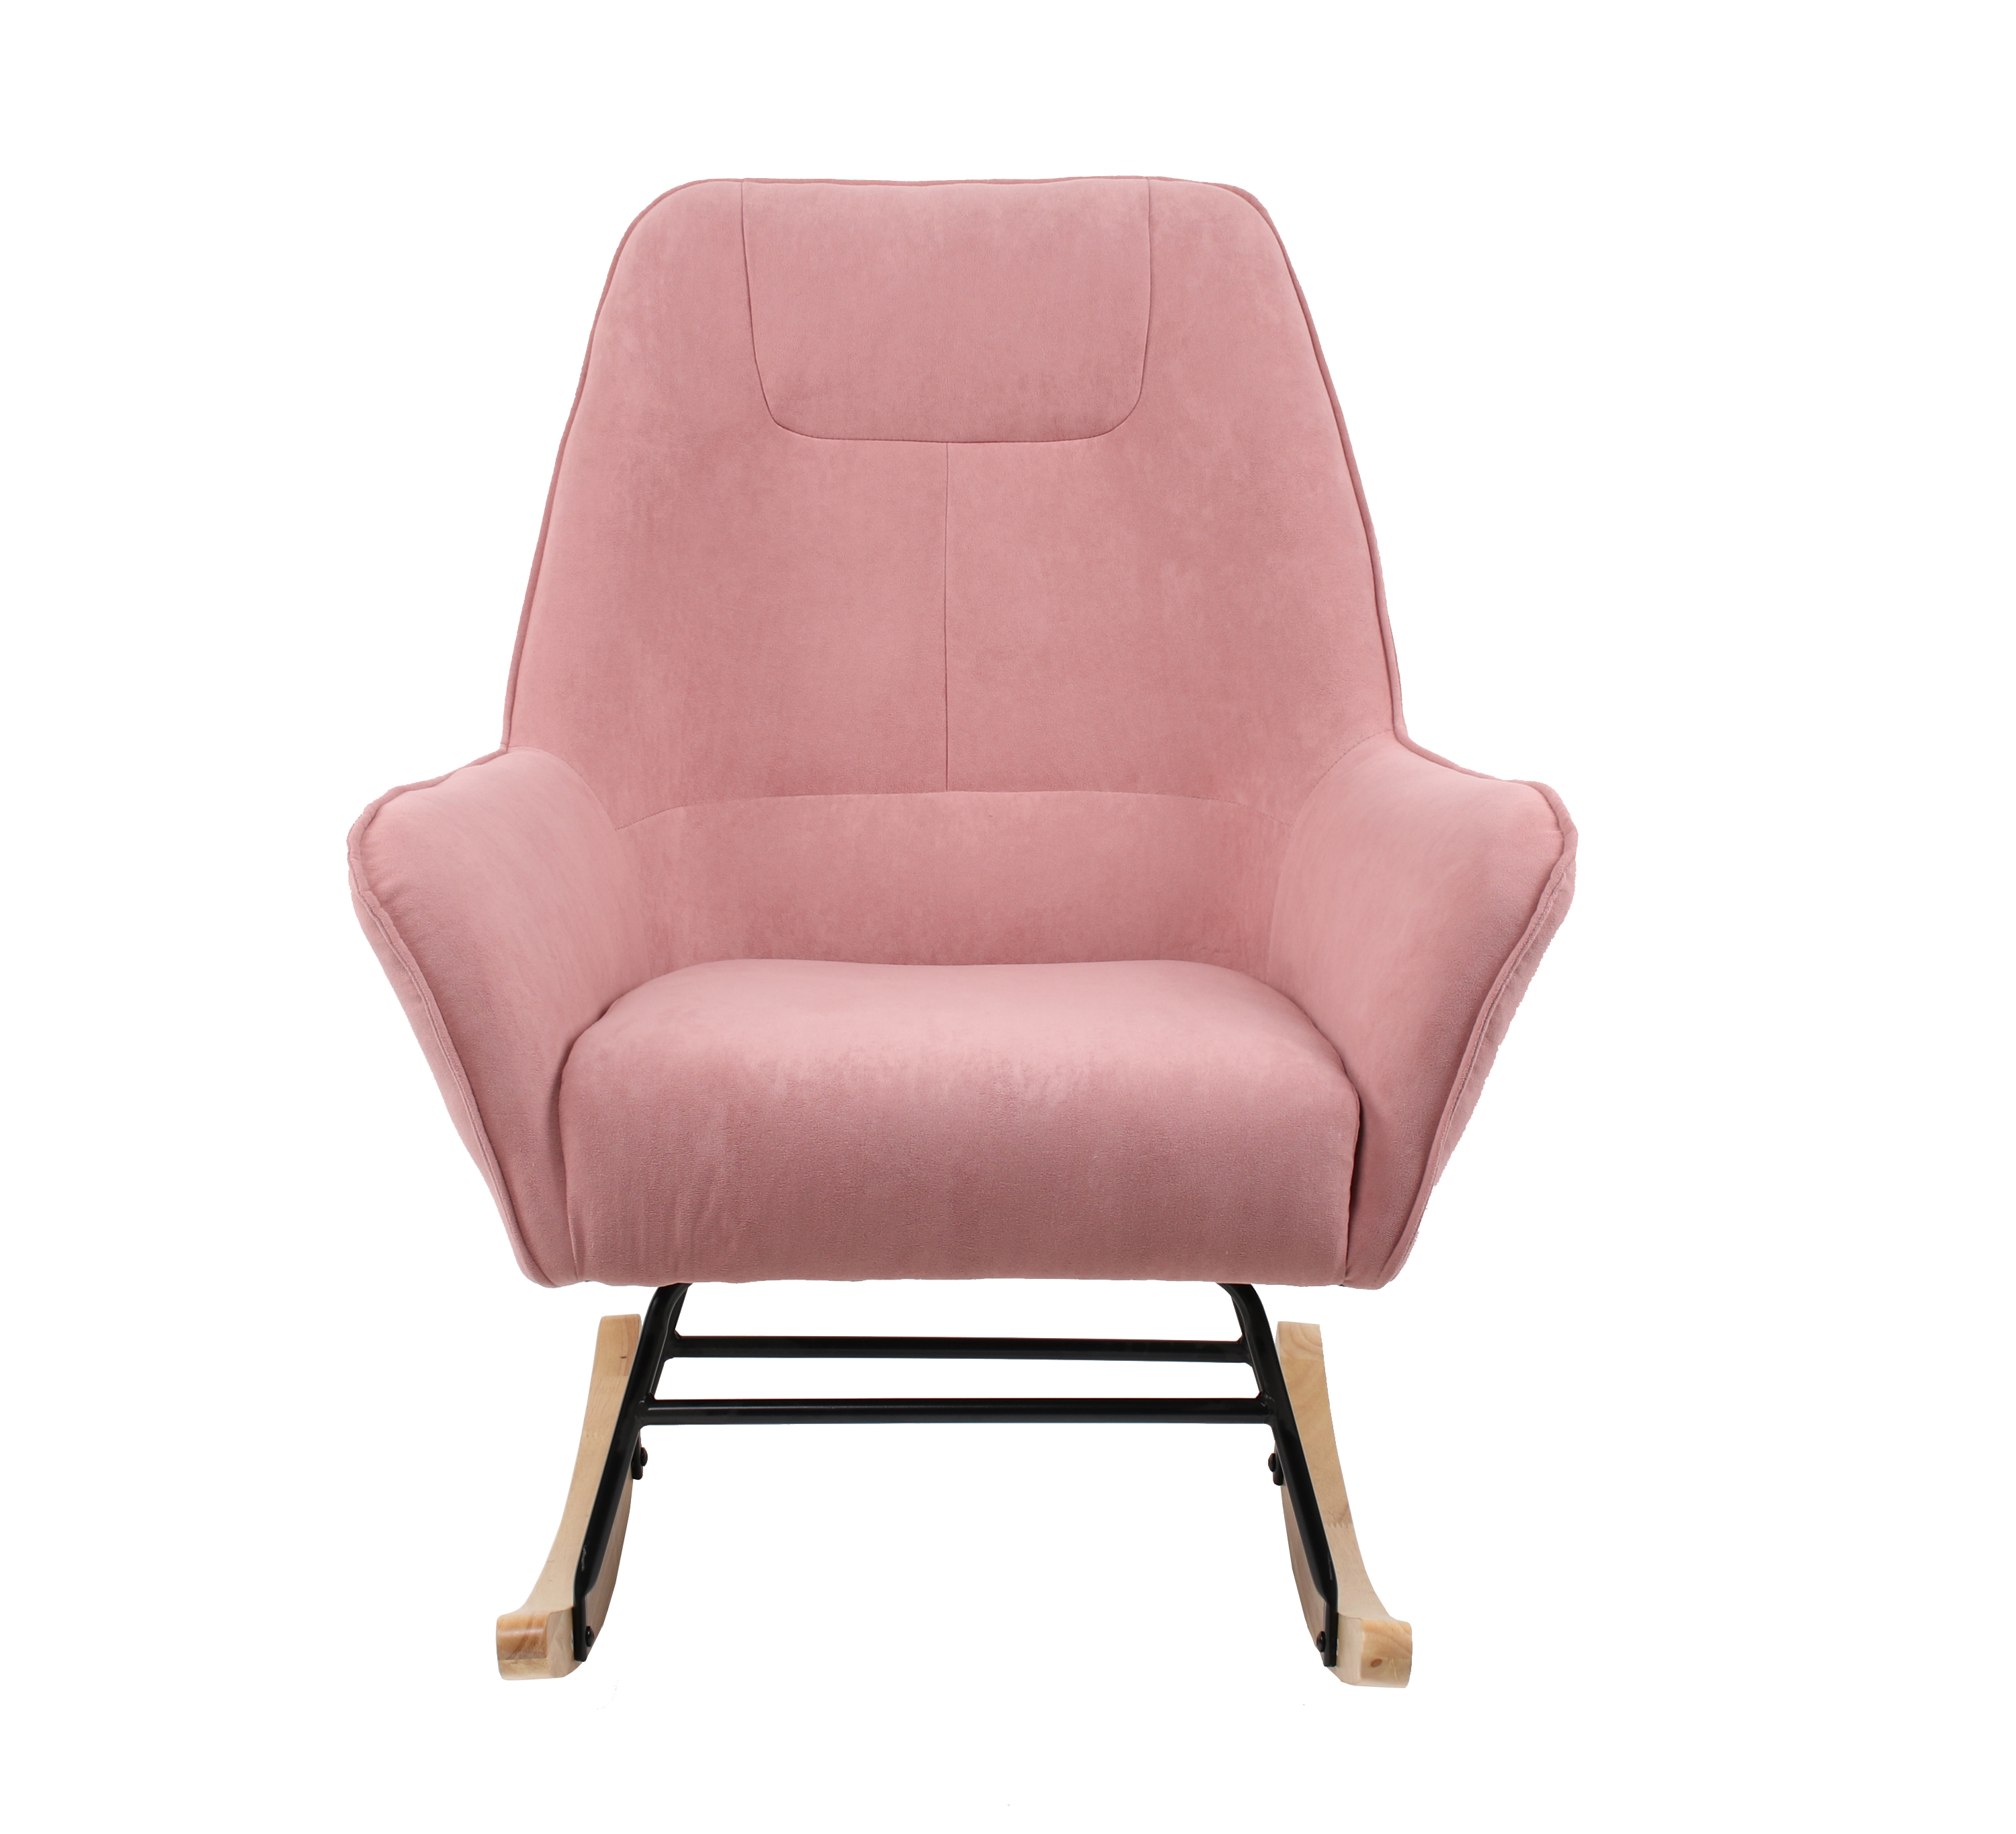 SUPERLIVING ROCK CHAIR PINK